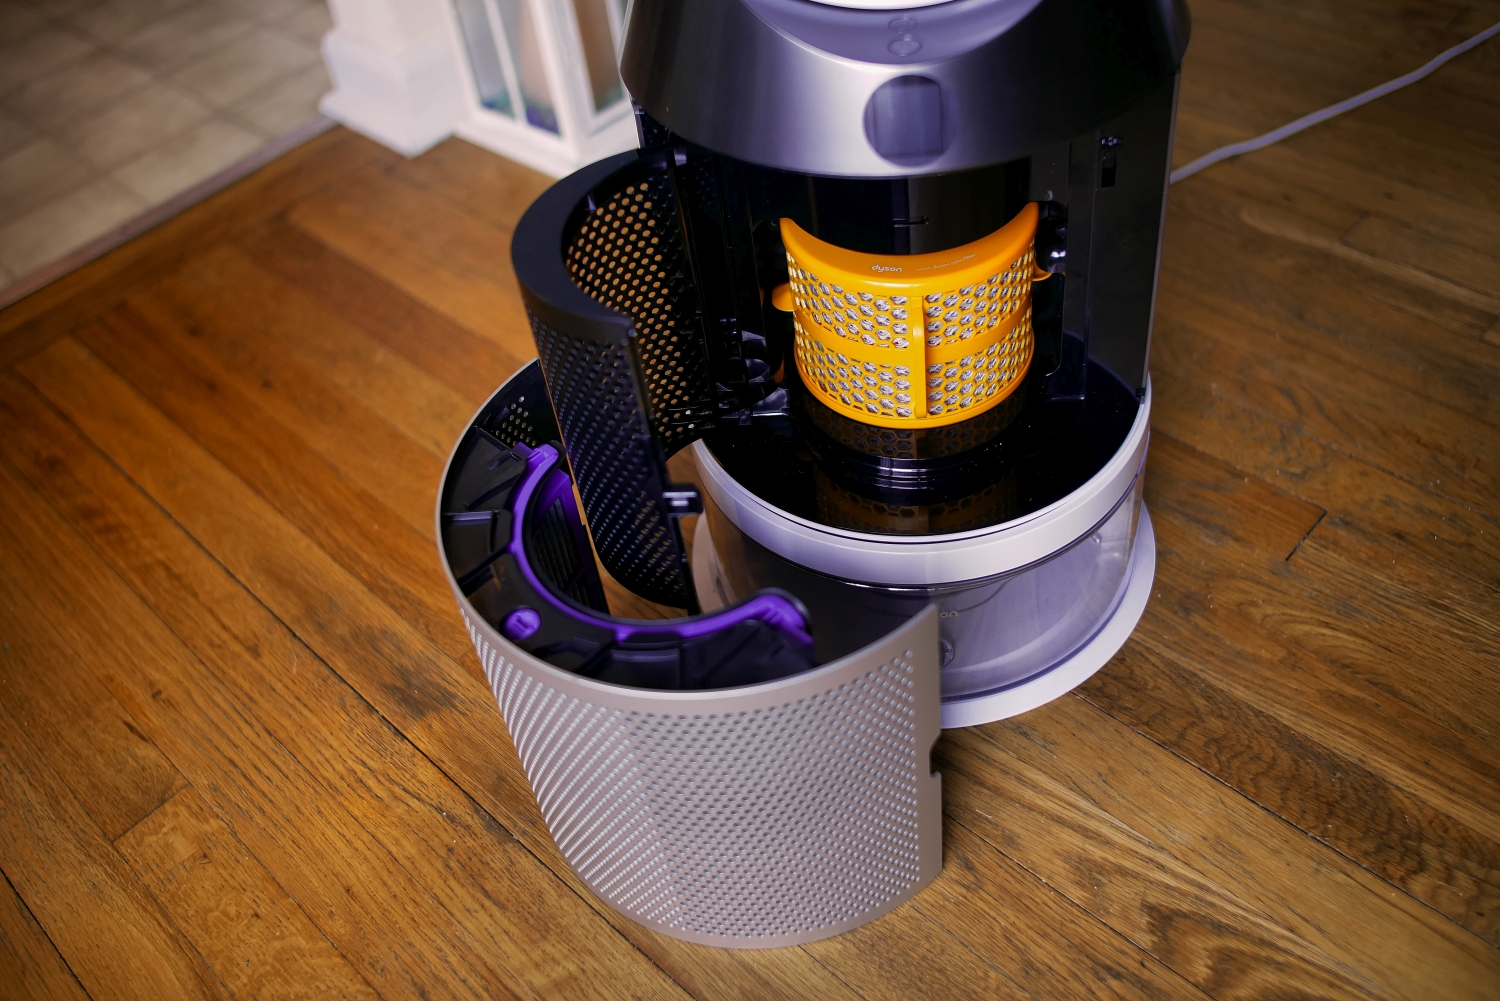 Review: Add some moisture to your home with the Dyson Humidifier